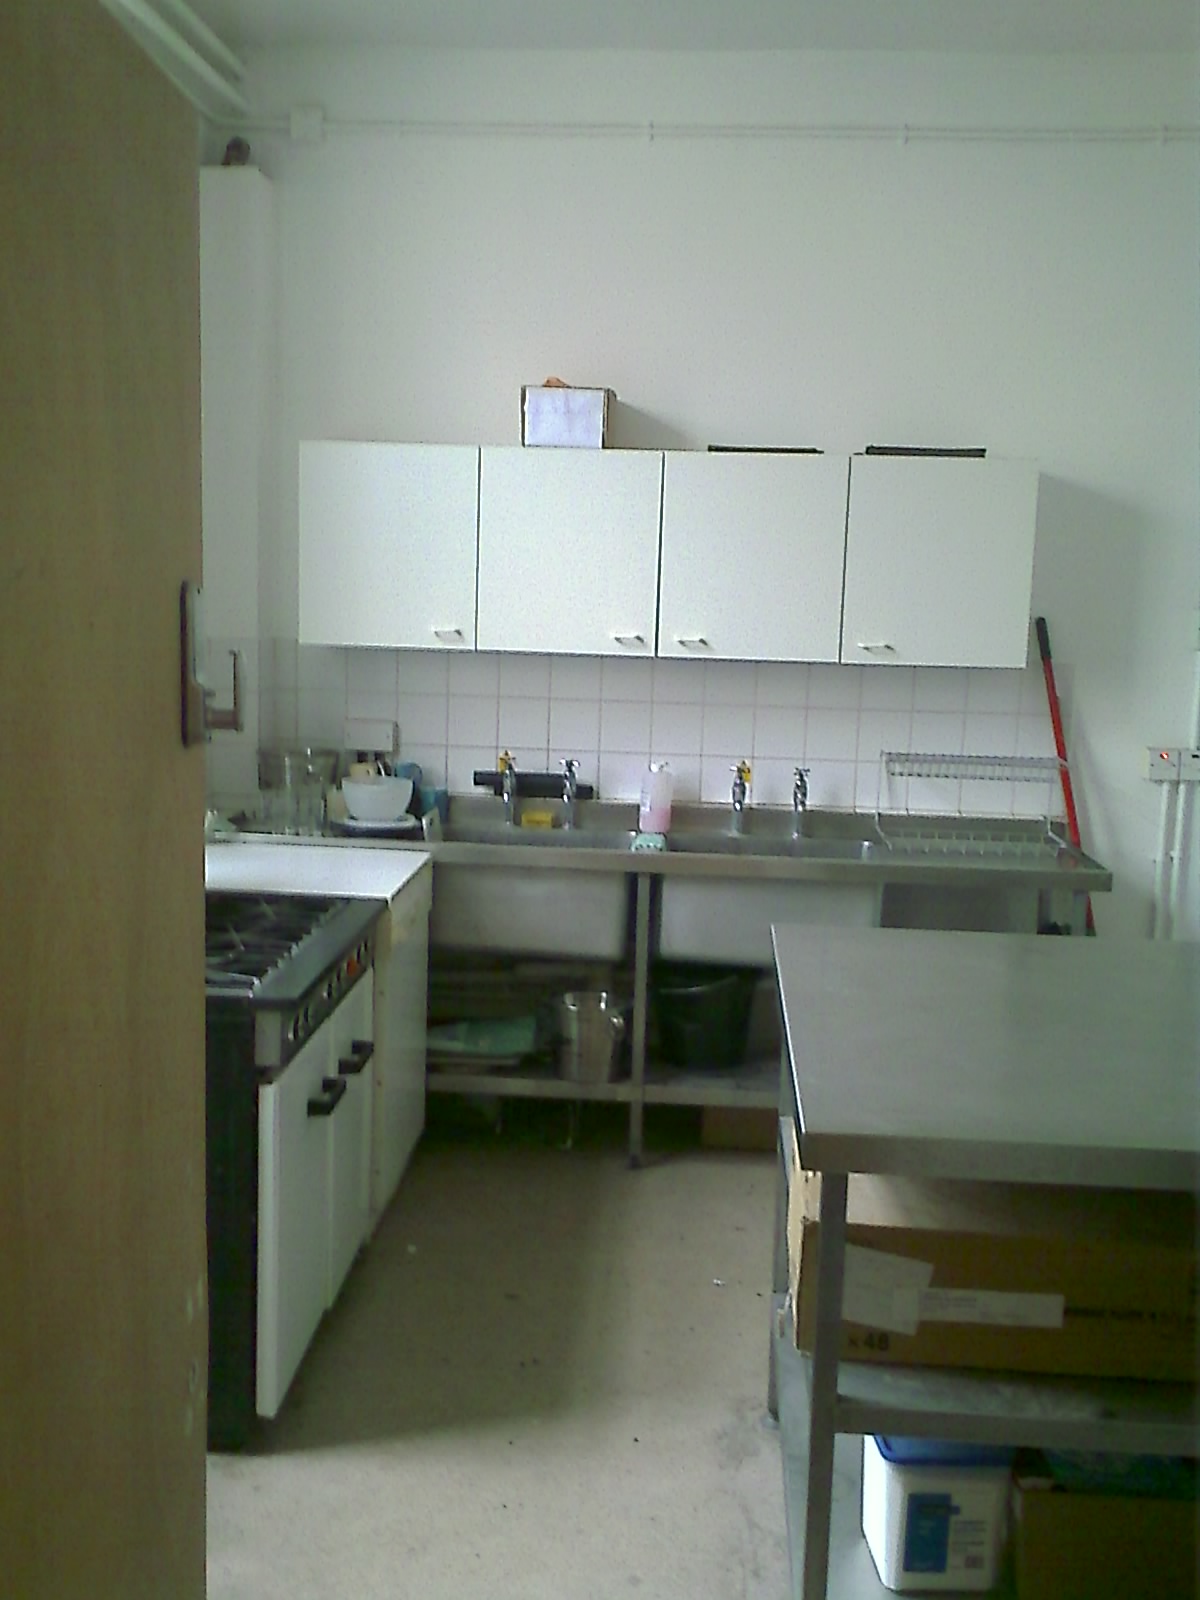 a kitchen with cabinets and an oven that is partially missing